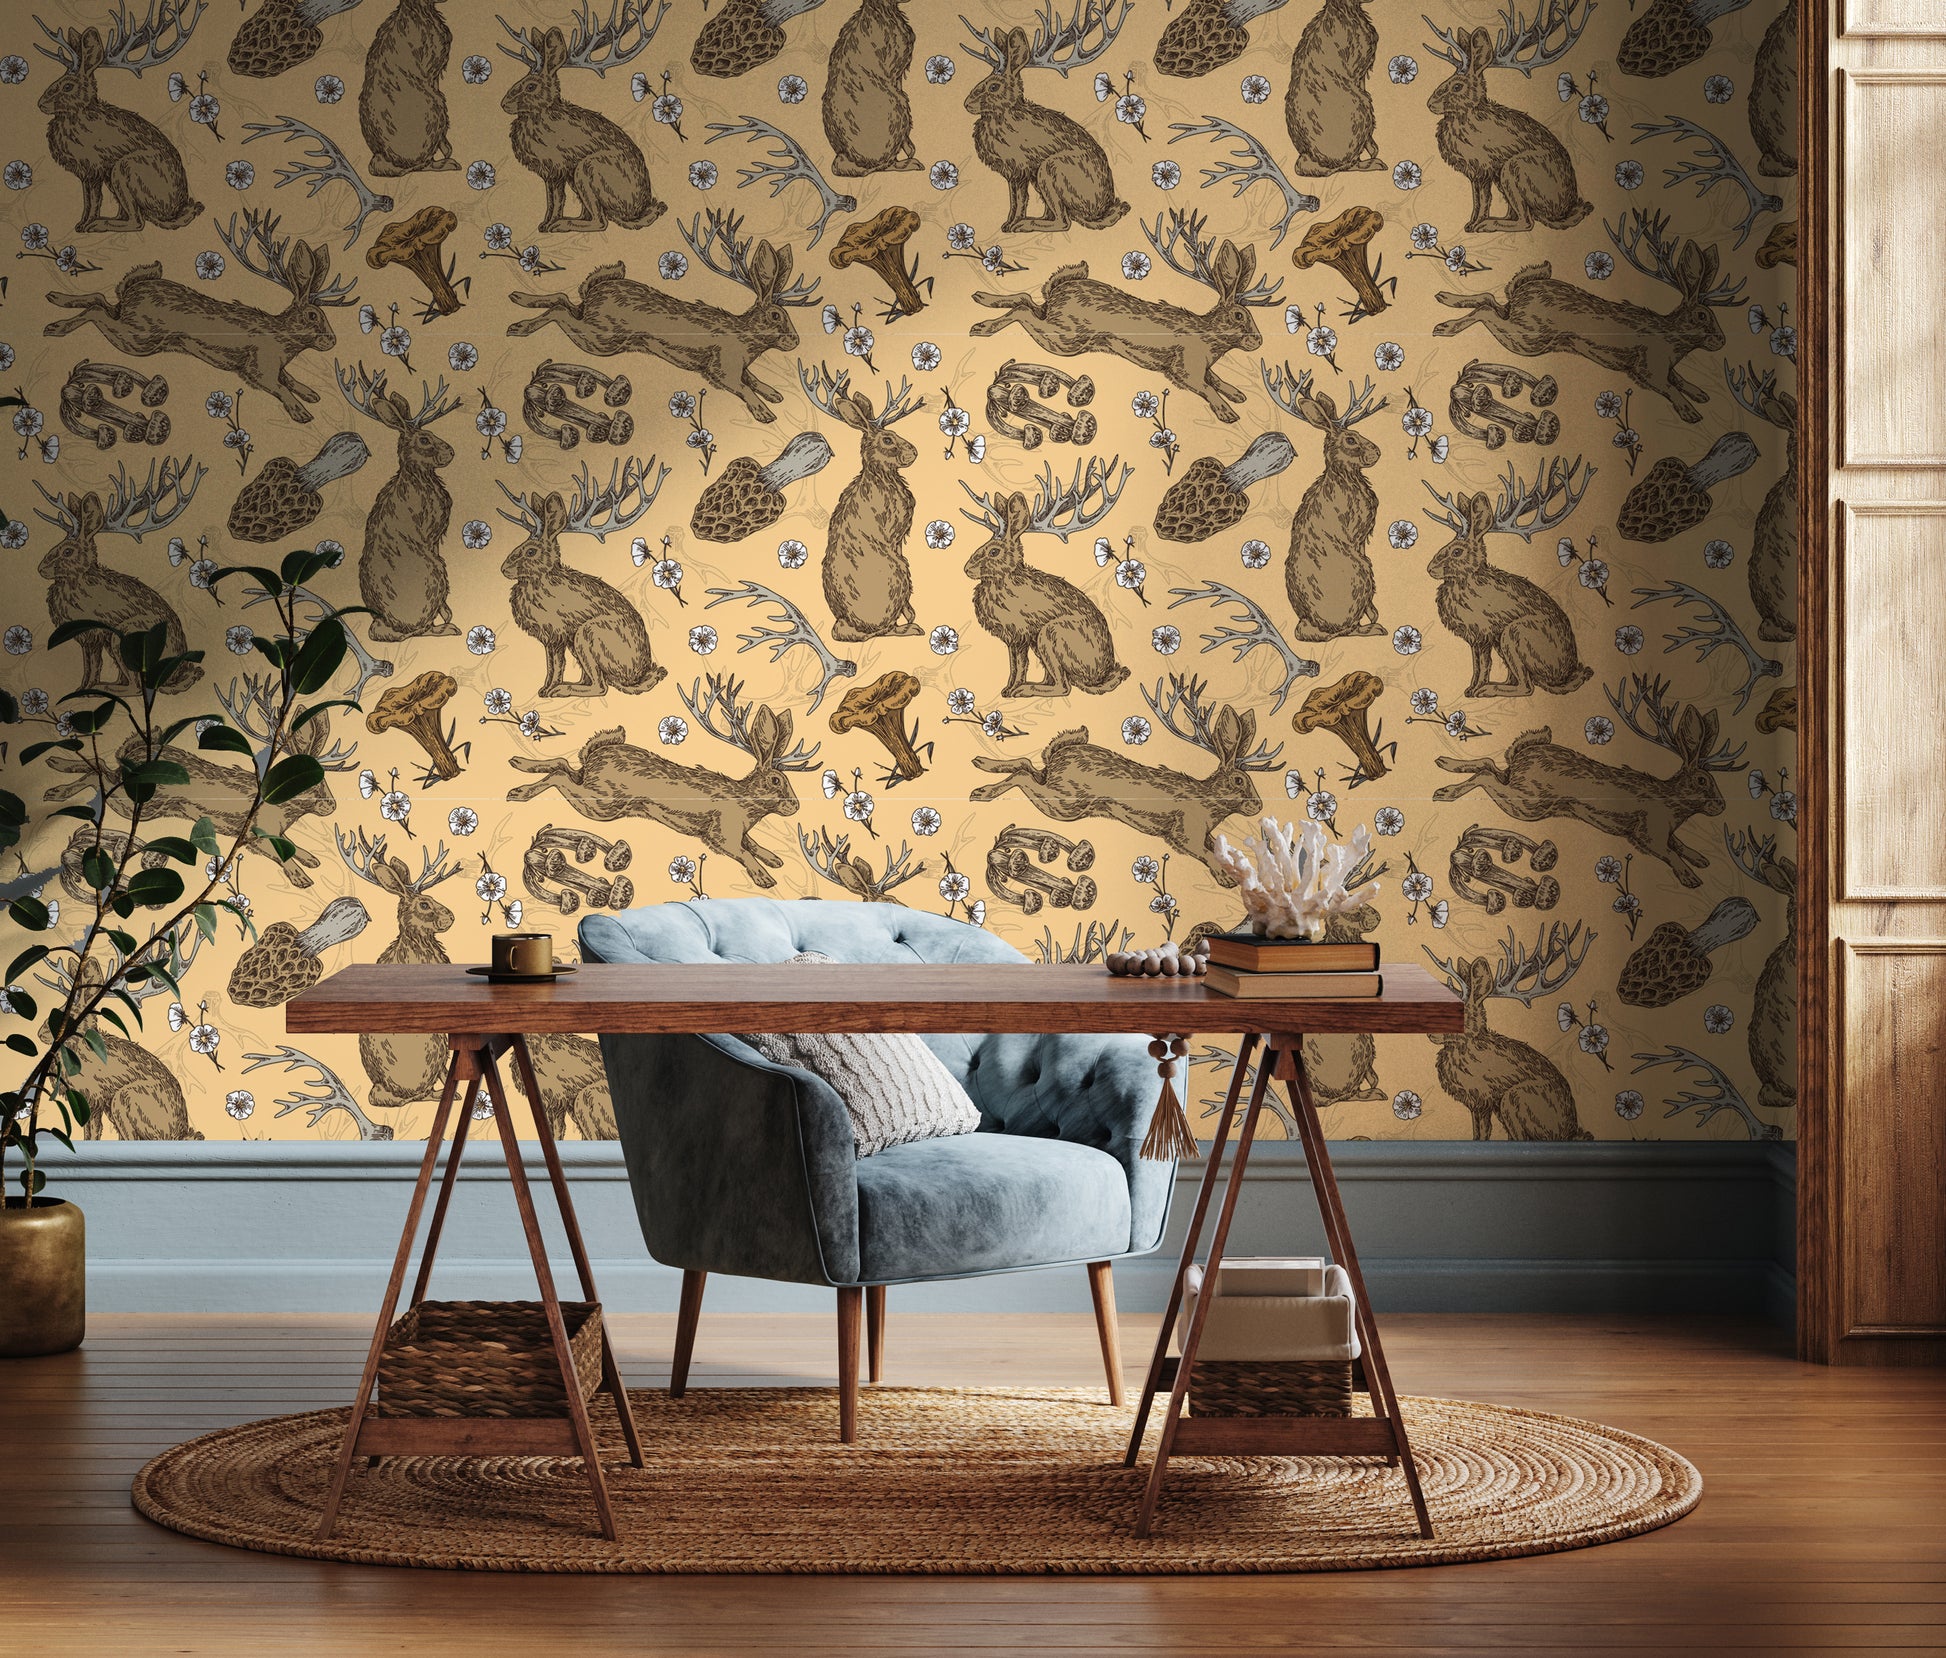 Jackalope and mushroom removable peel and stick wallpaper in a home office